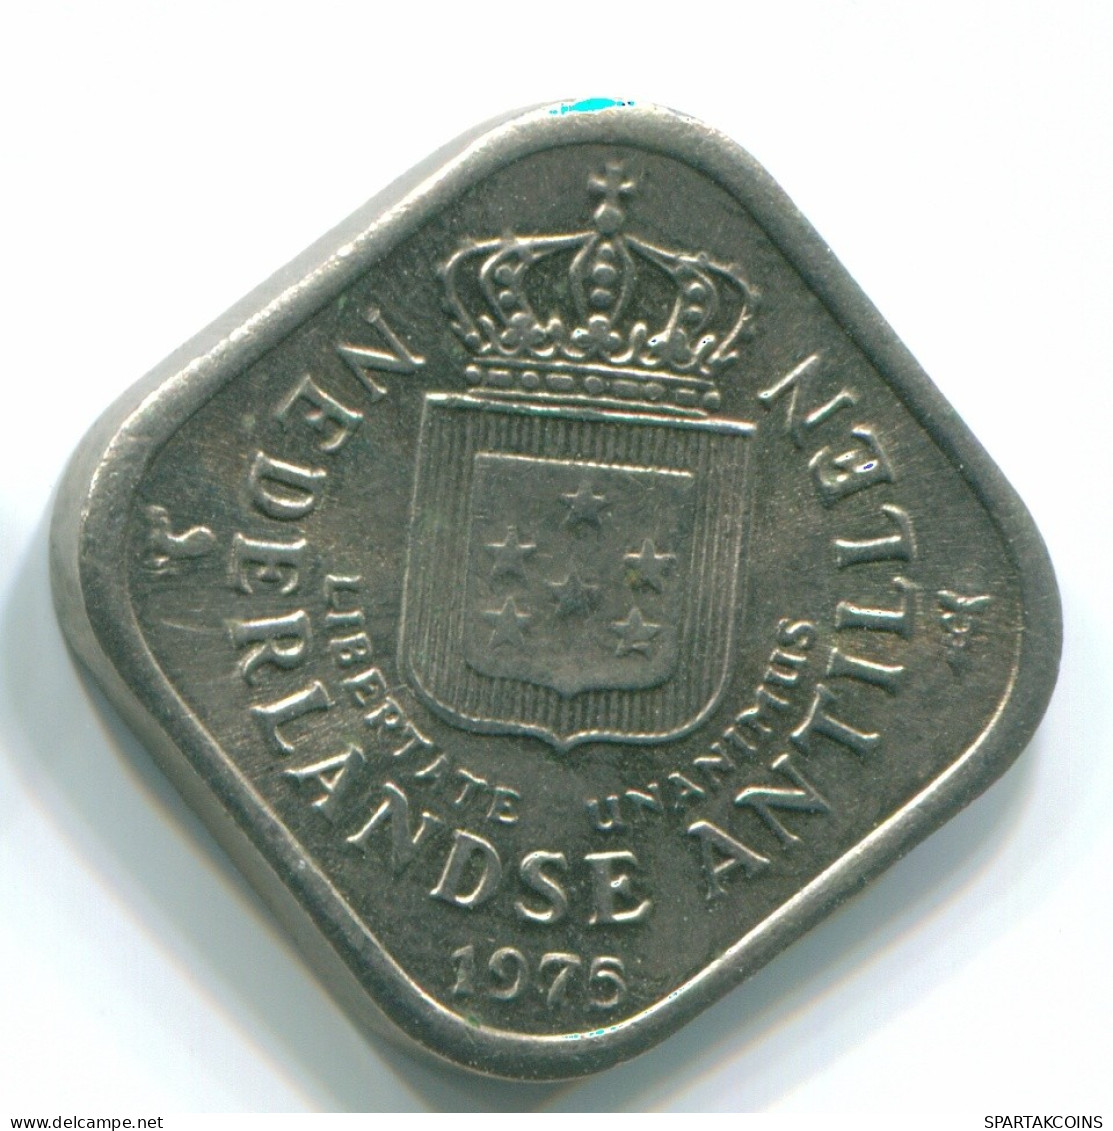 5 CENTS 1975 NETHERLANDS ANTILLES Nickel Colonial Coin #S12257.U.A - Antille Olandesi